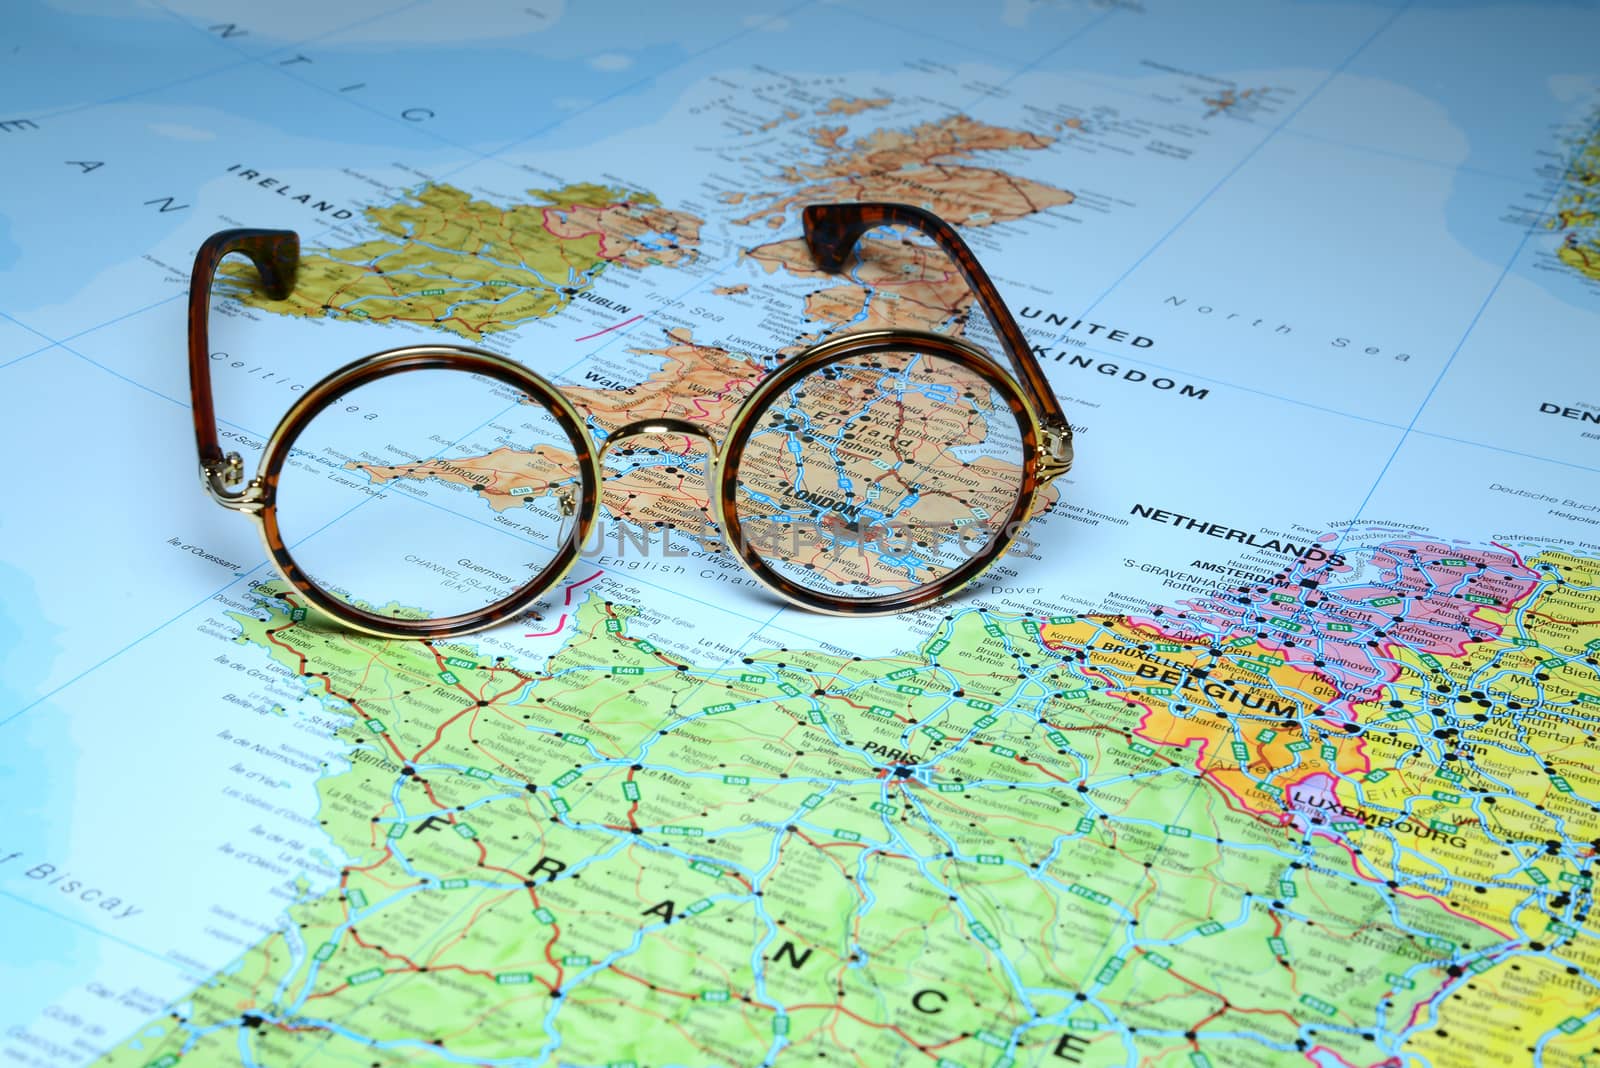 Photo of glasses on a map of europe. Focus on London, Great Britain. May be used as illustration for traveling theme.